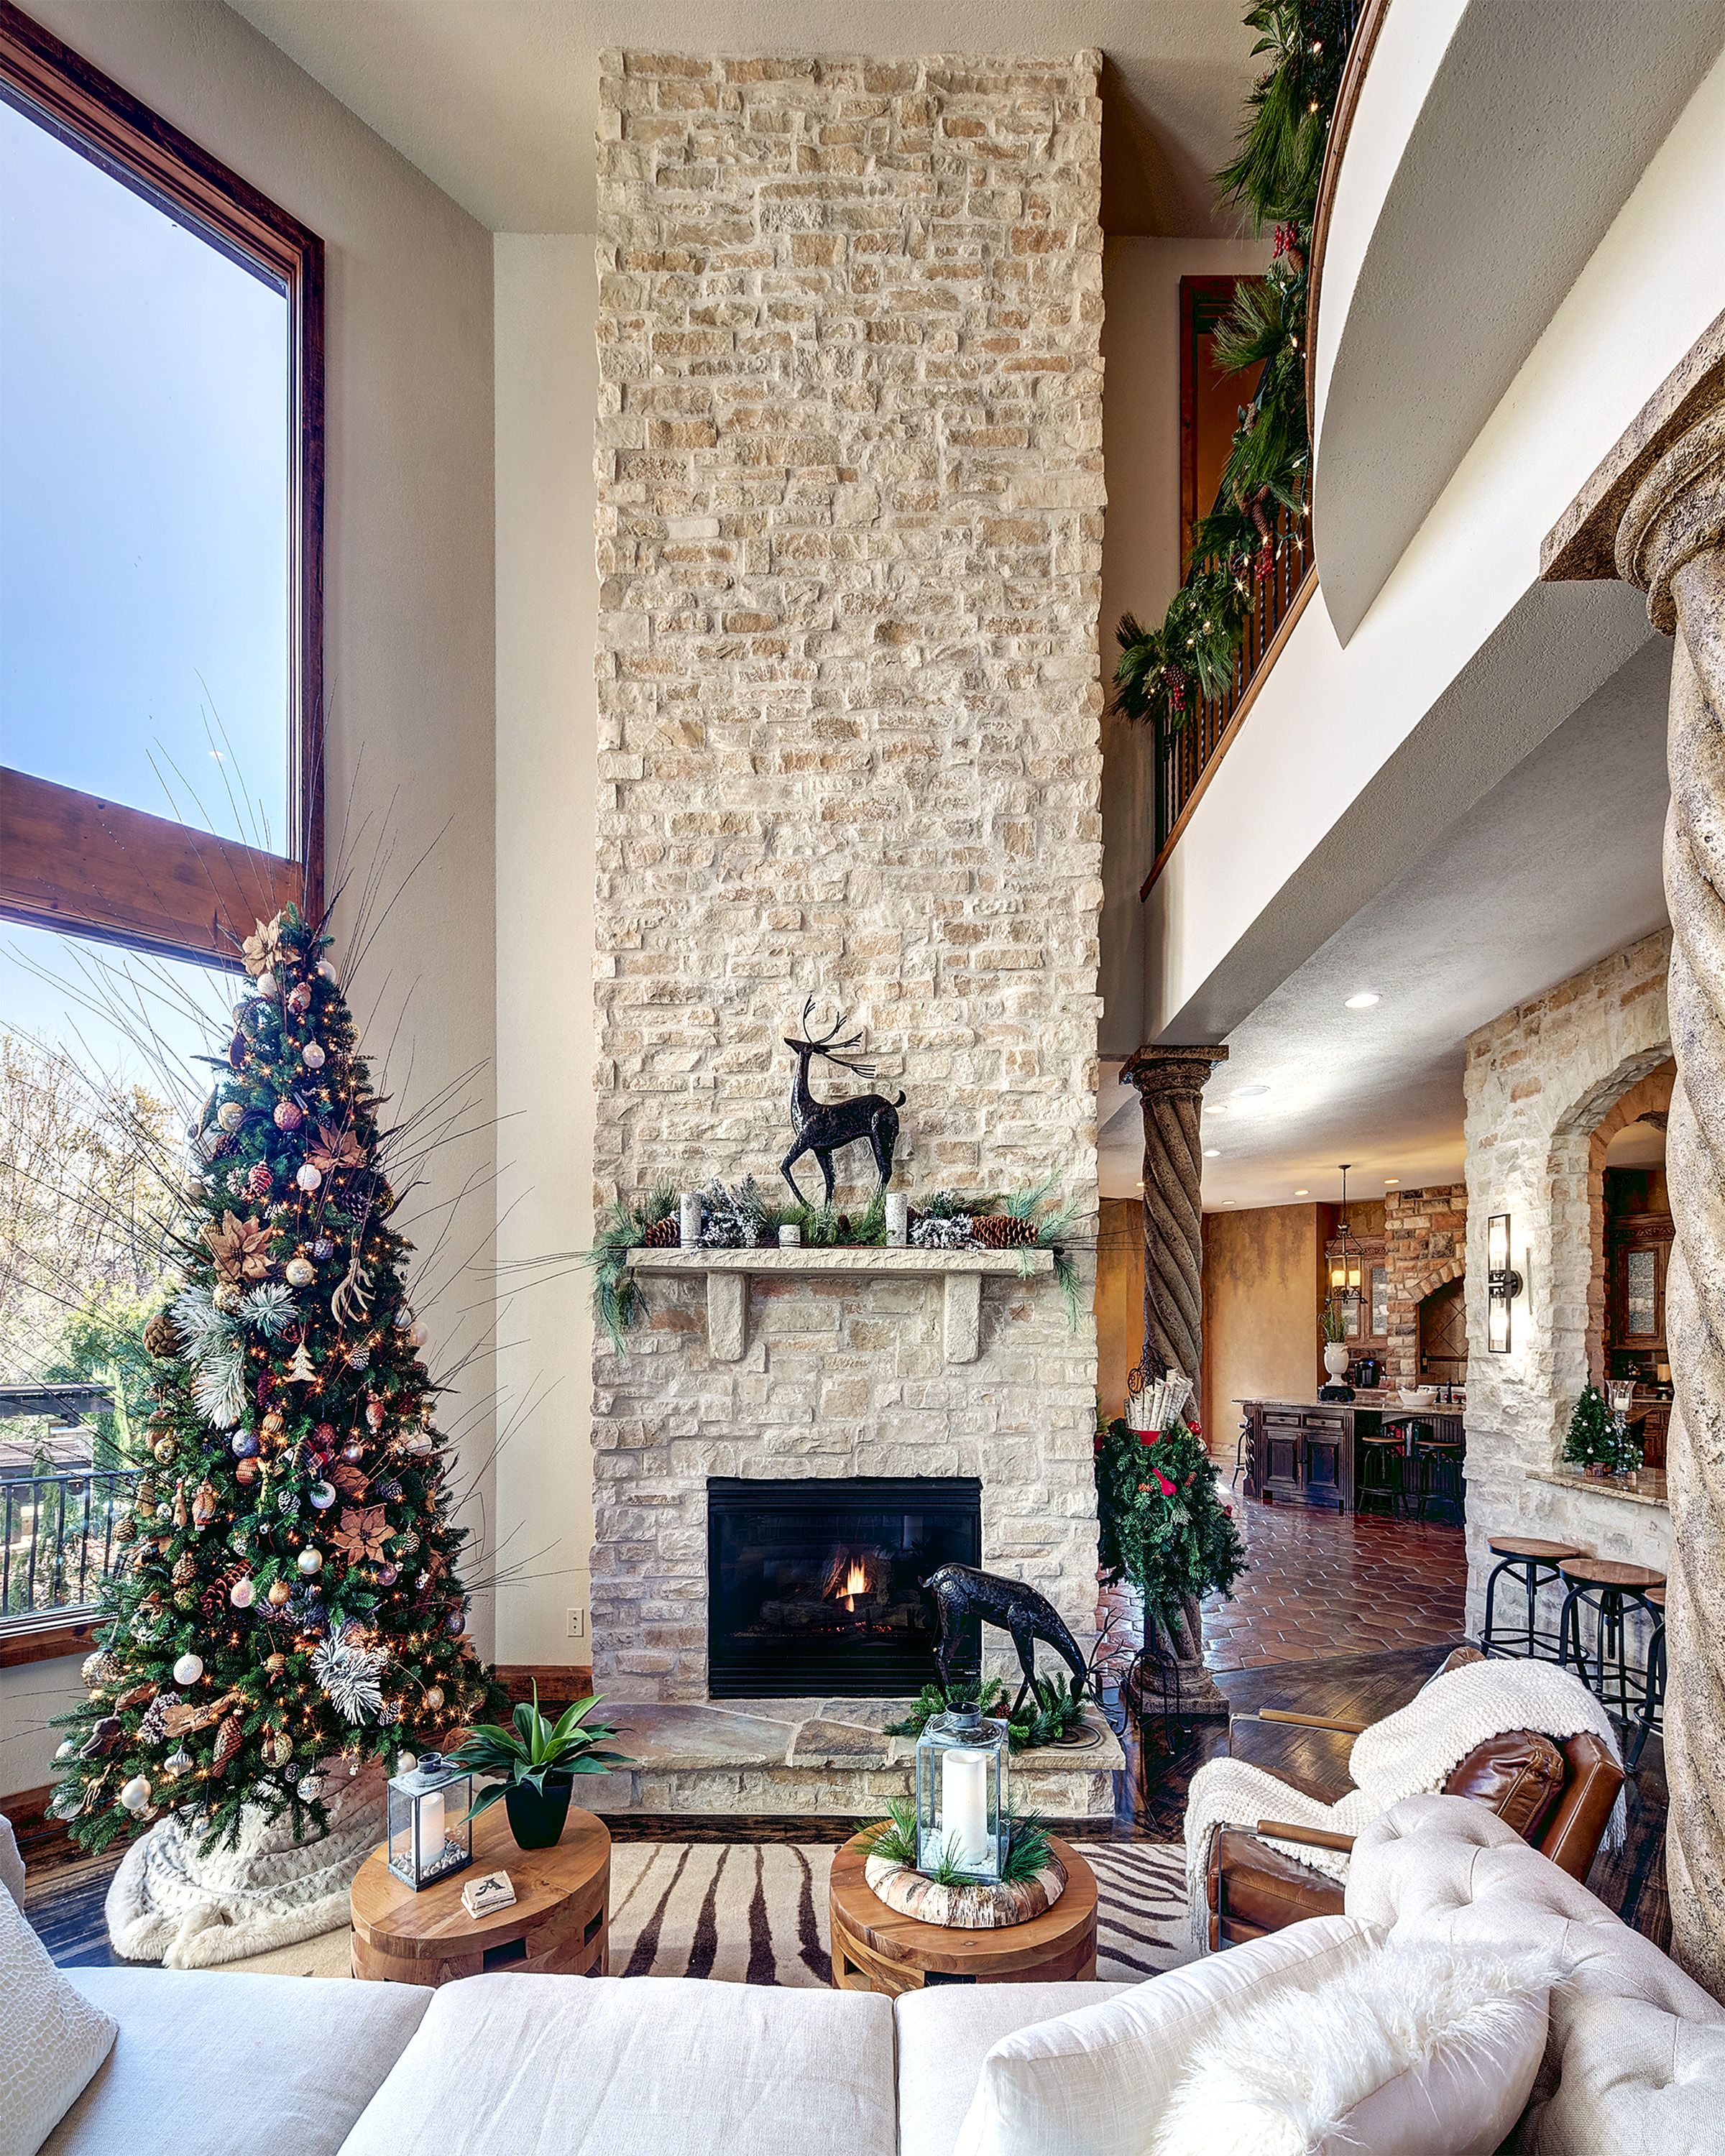 Ledge Stone Fireplace Luxury Indoor Project Idea for Your Fireplace Profile Canyon